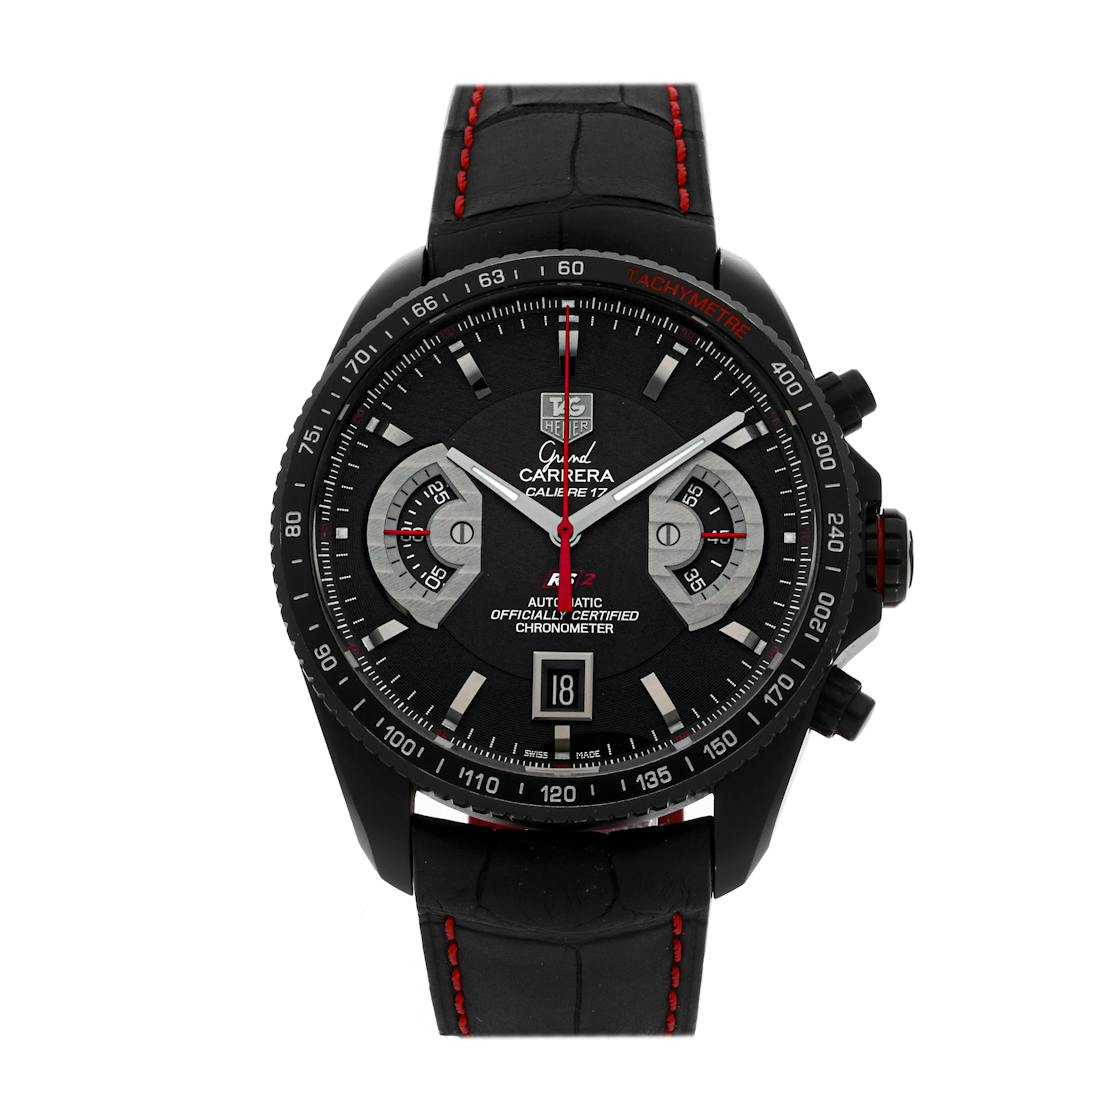 Tag Heuer Grand Carrera GMT Chronograph Silver Dial Steel Mens